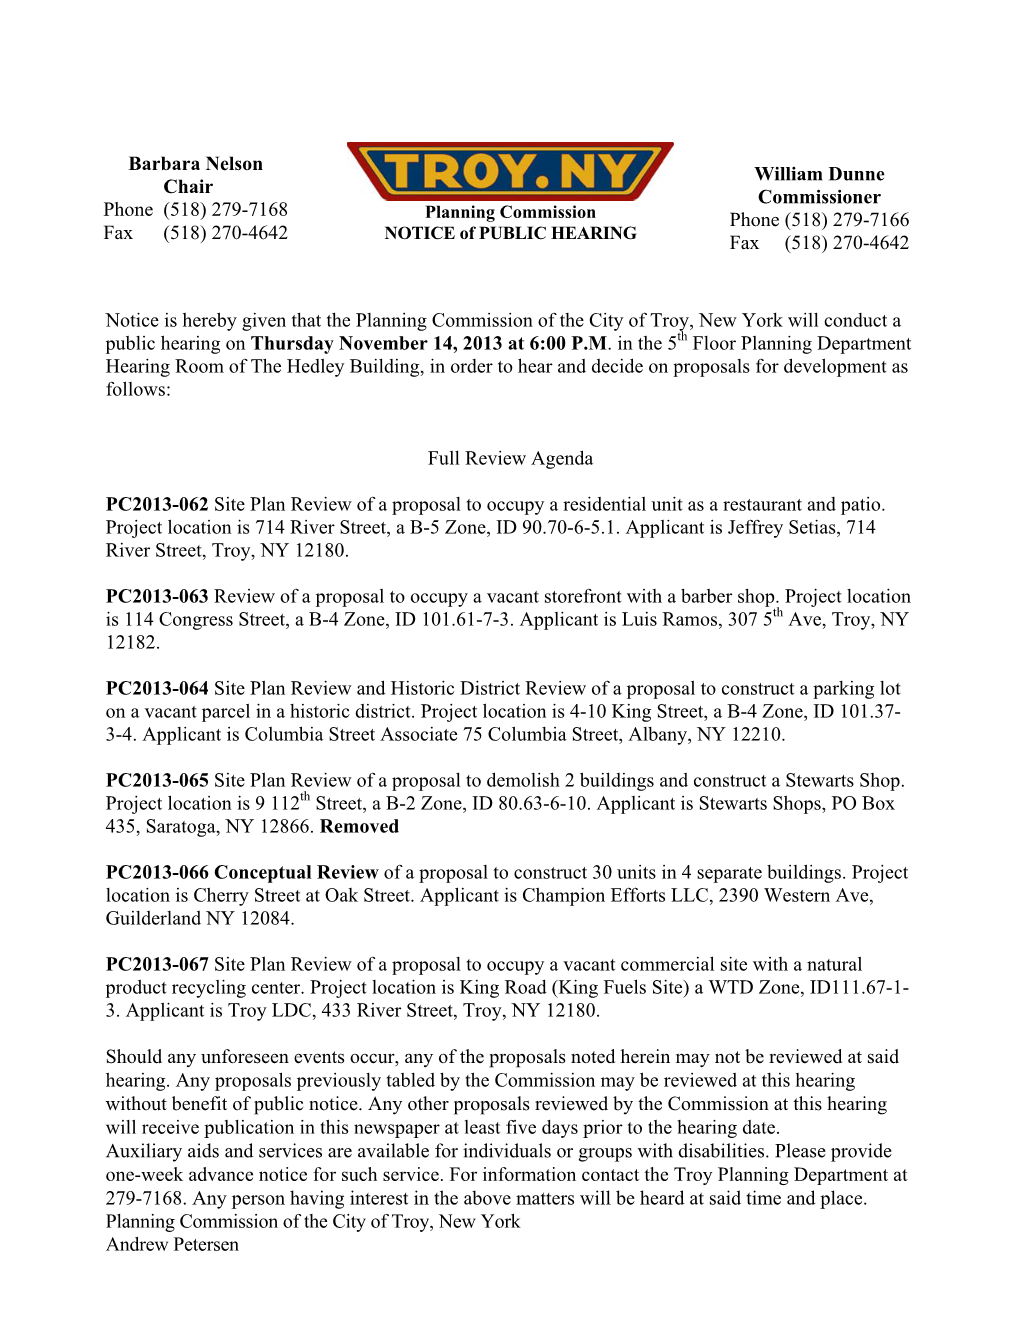 E City of Troy, New York Will Conduct a Public Hearing on Thursday November 14, 2013 at 6:00 P.M